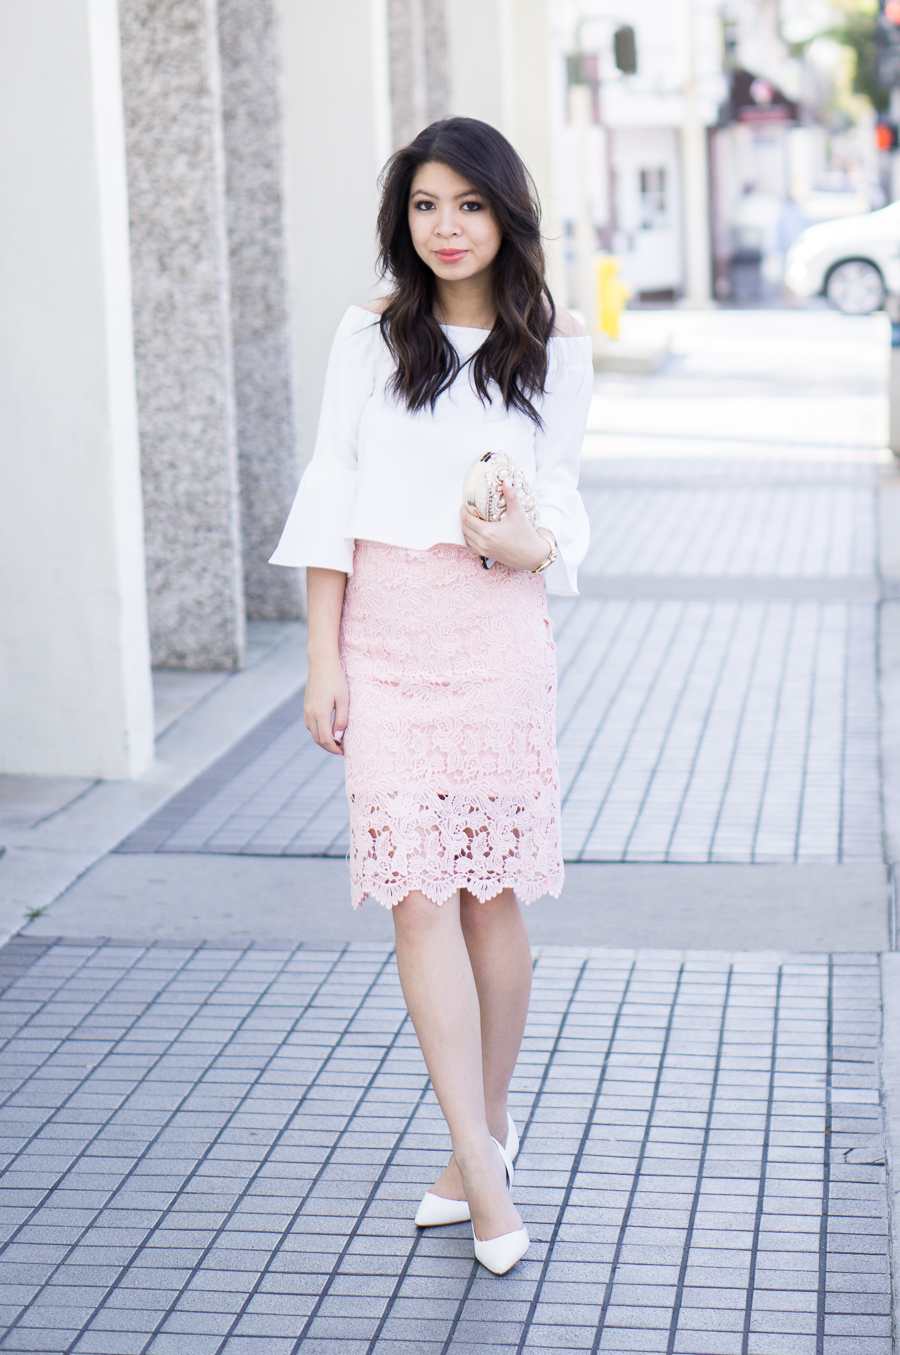 justatinabit-lace-pencil-skirt-outfit-bell-sleeves-off-the-shoulder-top-spring-fashion-petite-fashion-blog-1